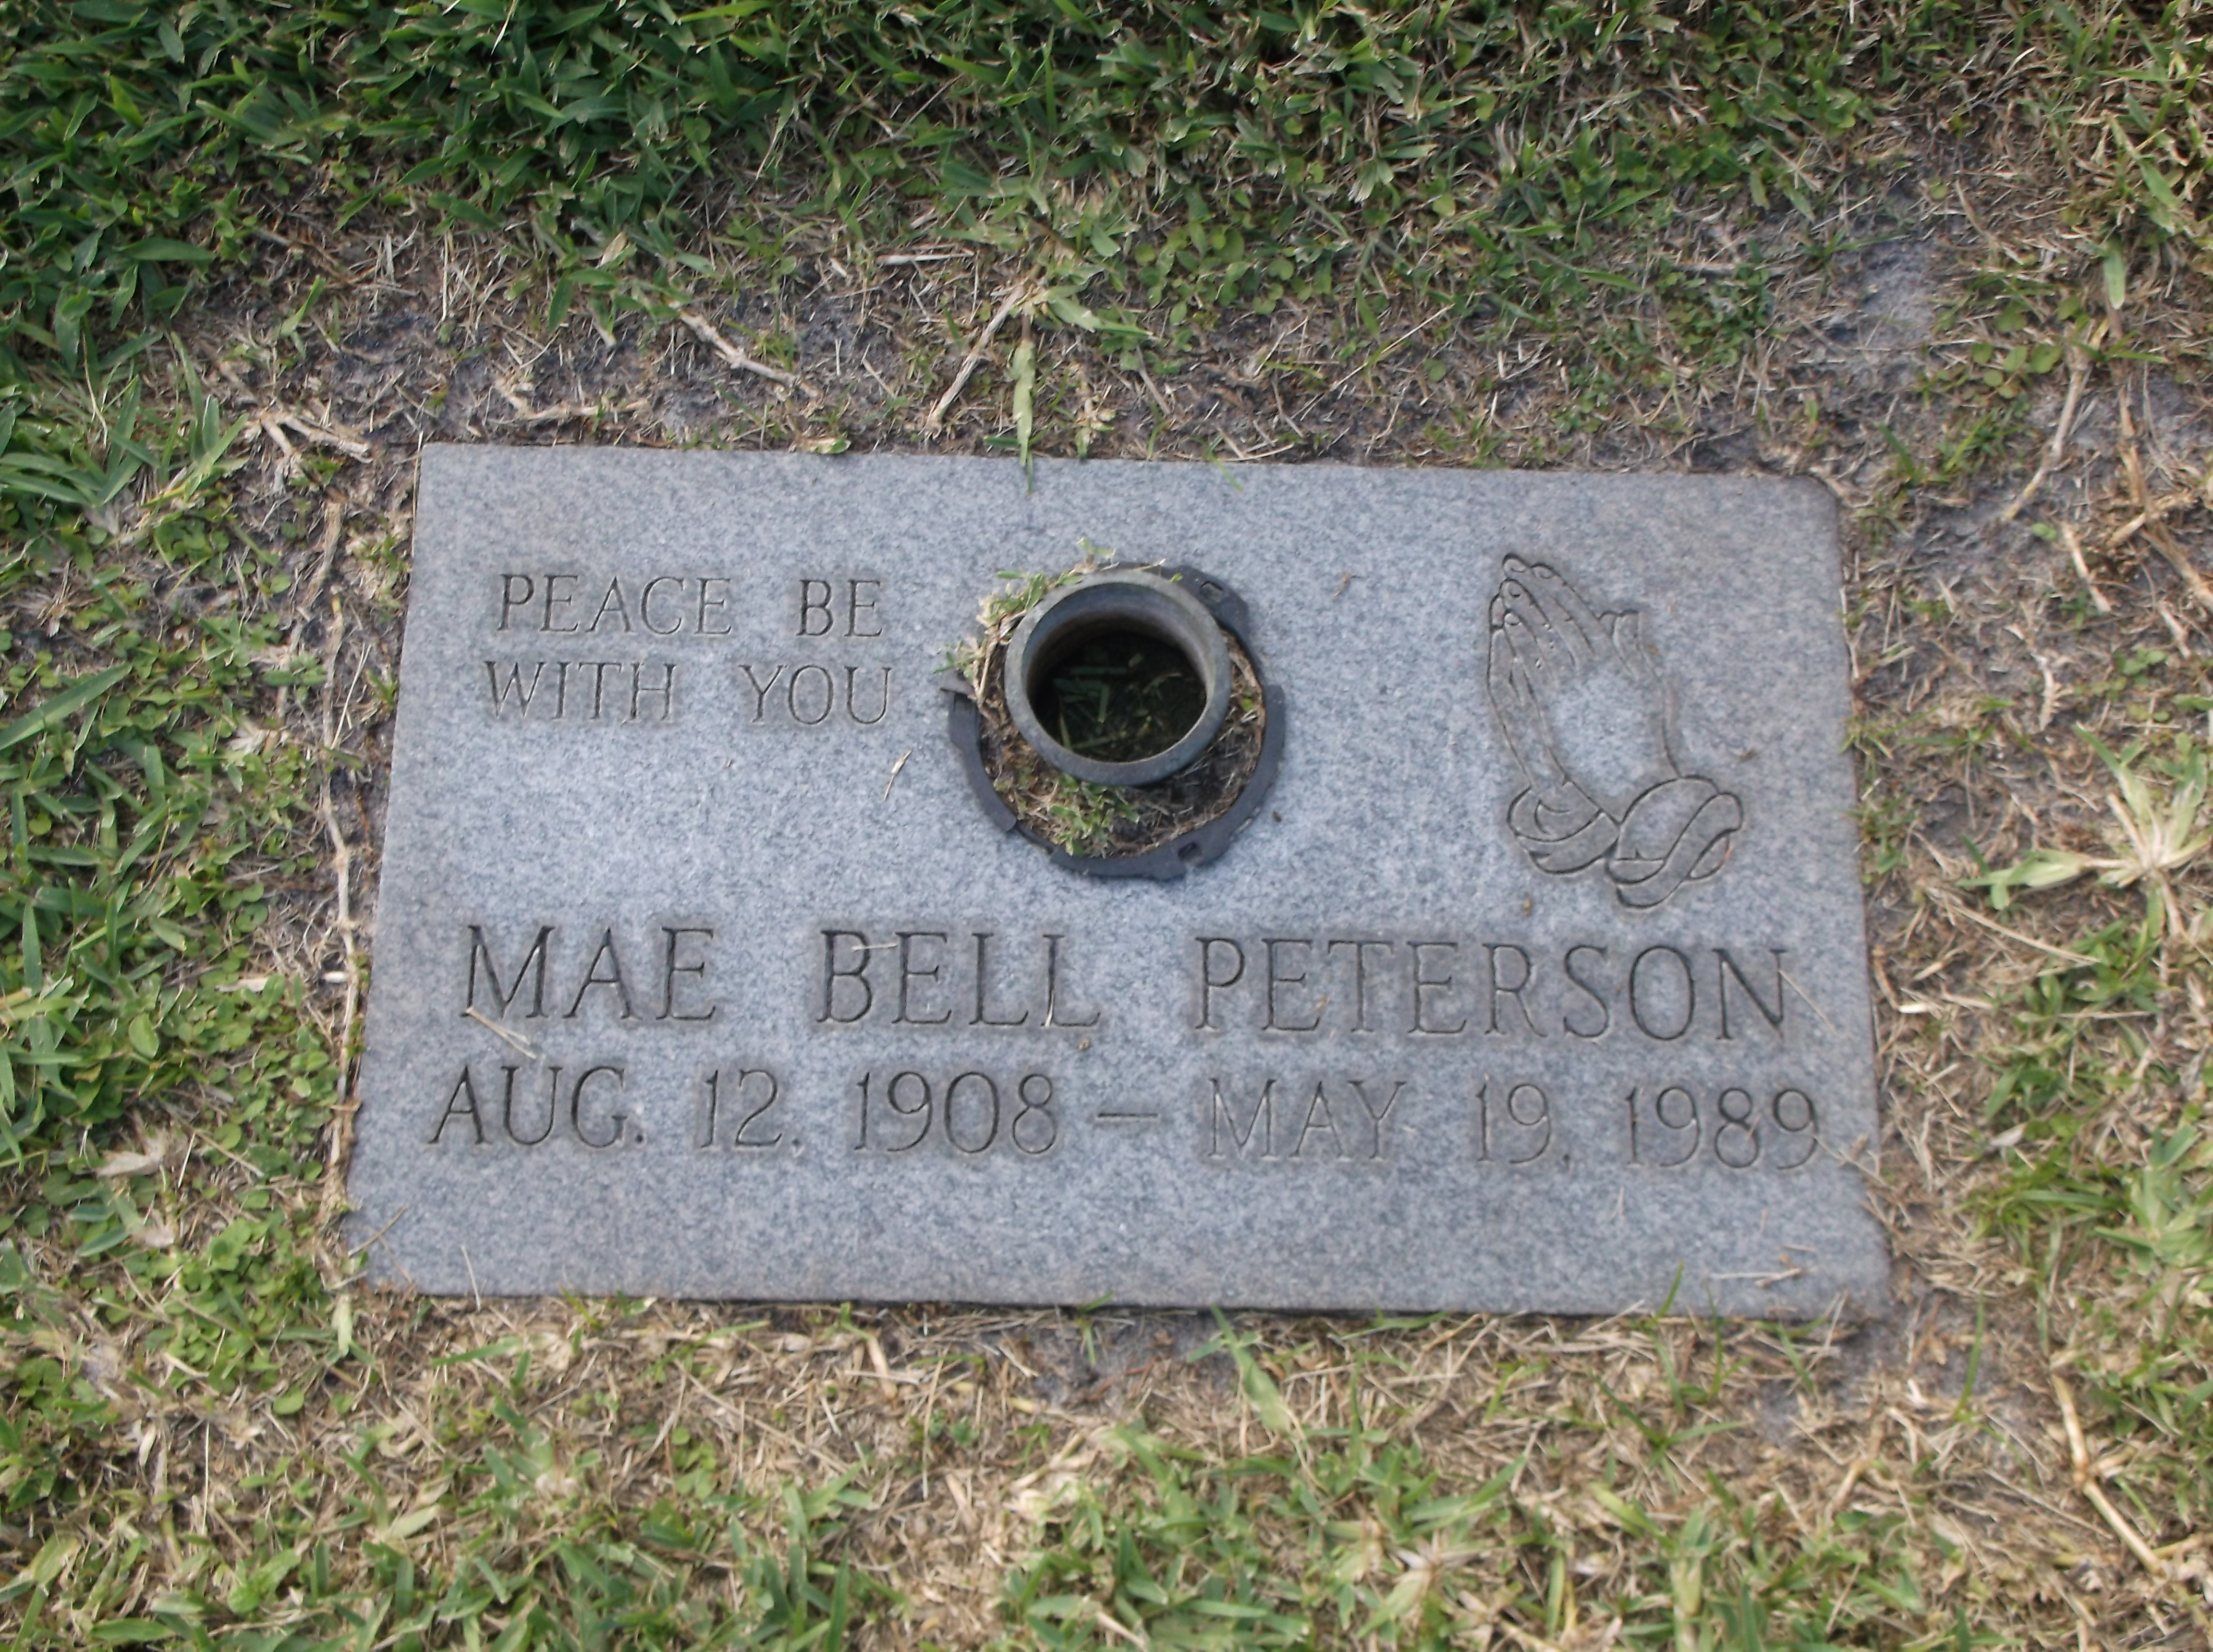 Mae Bell Peterson